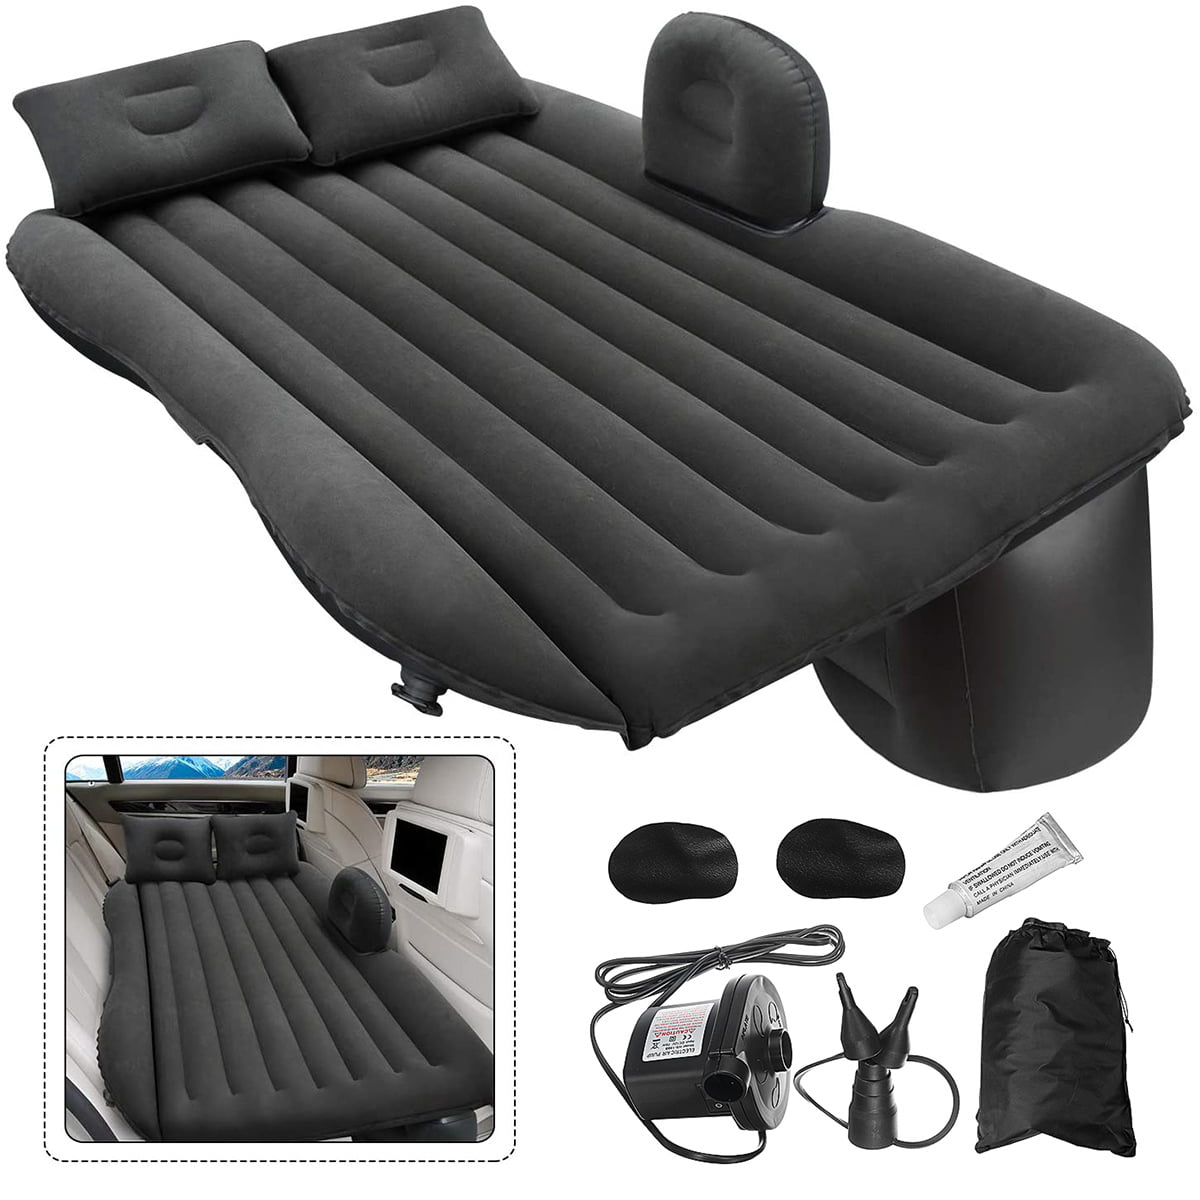 Inflatable Car Air Bed Back Seat Mattress Travel Rest Sleep Camping w/ 2 Pillows 